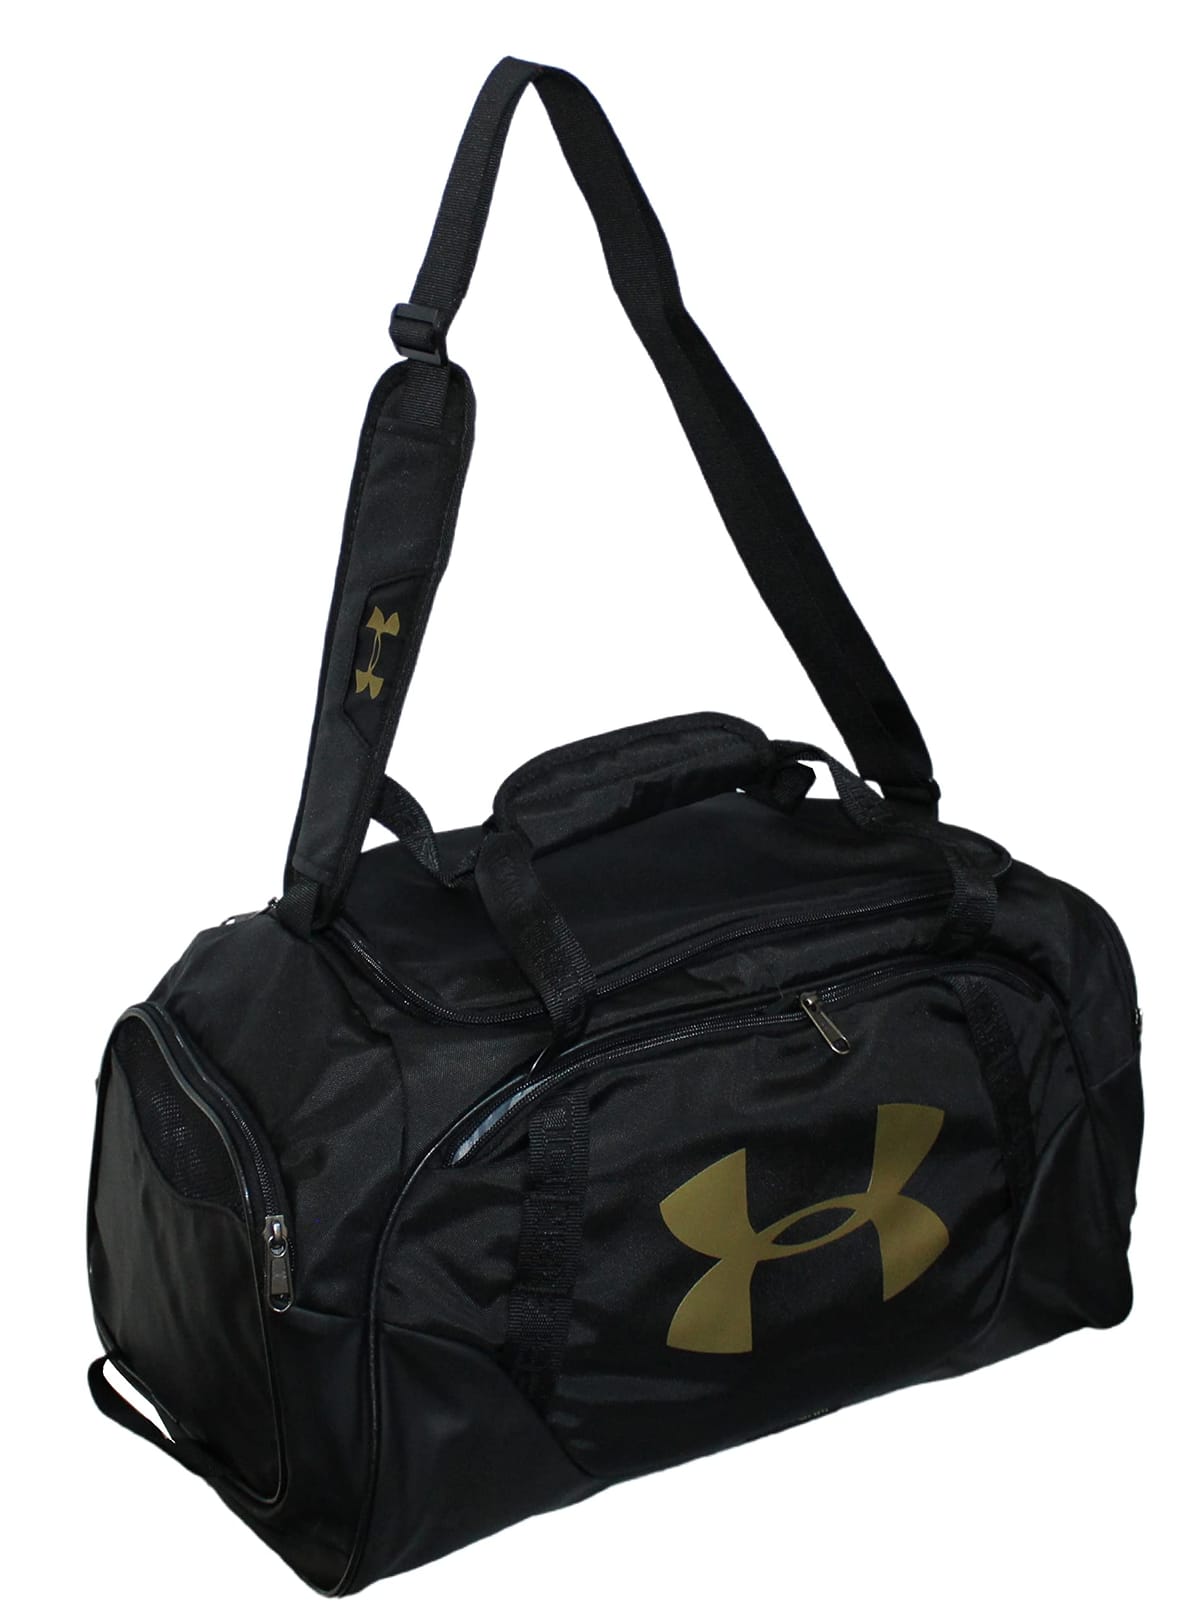 Under Armour Men 039 s UA Undeniable 3.0 Small Duffle Bag